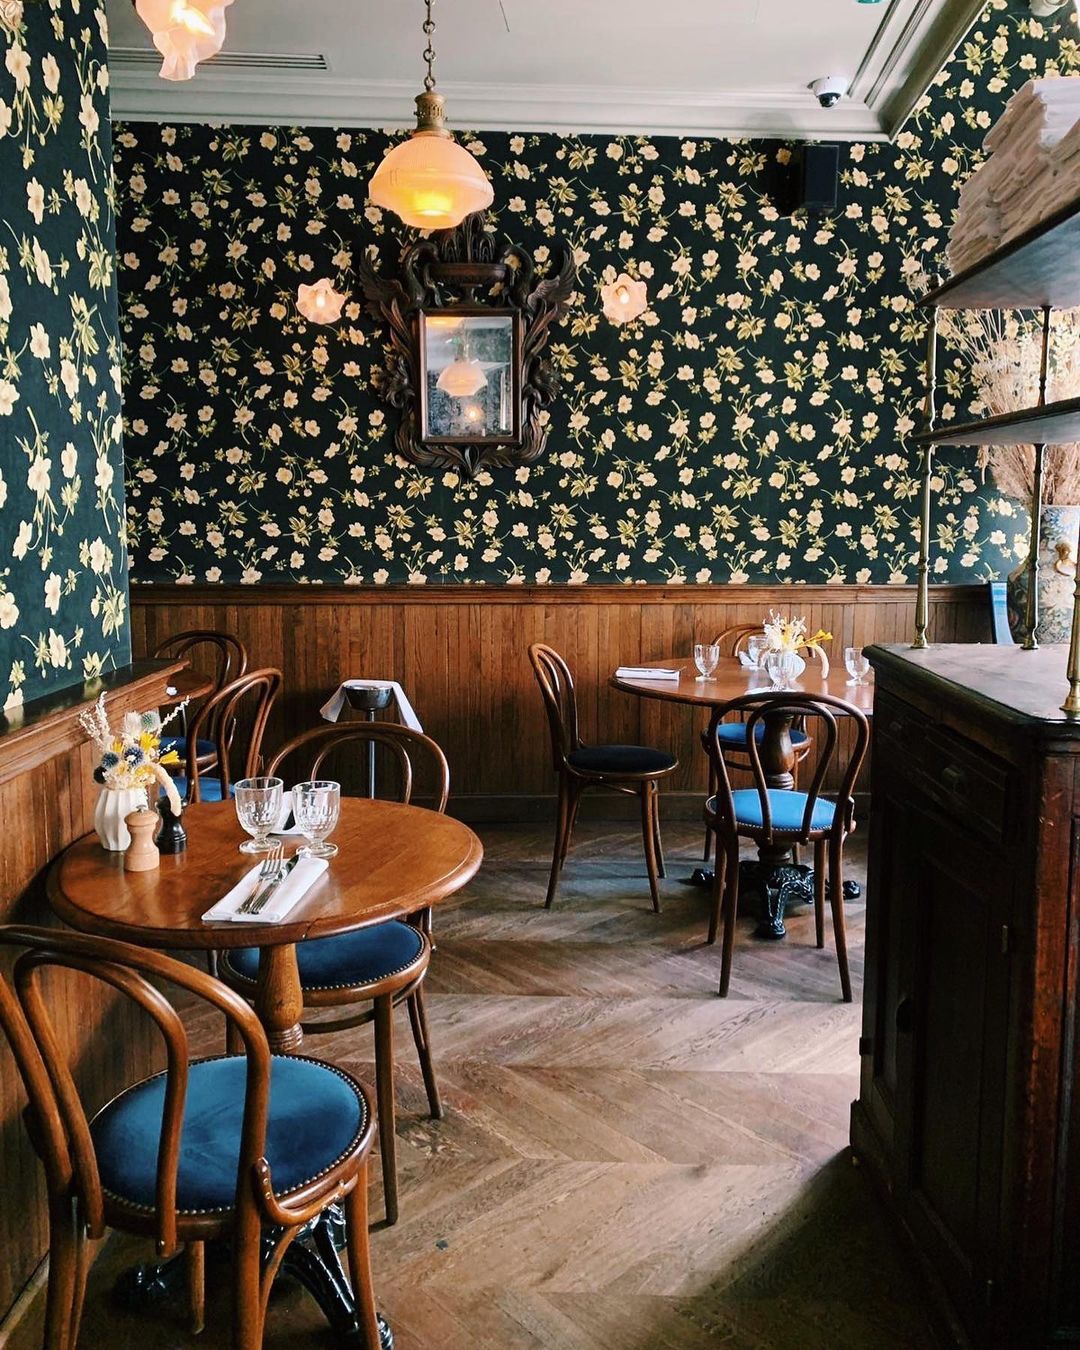 A deep teal wallpaper covered in cream wildflower motifs is juxtaposed by wood-paneled wainscoting at the bistro style bar at Hotel Providence in Paris